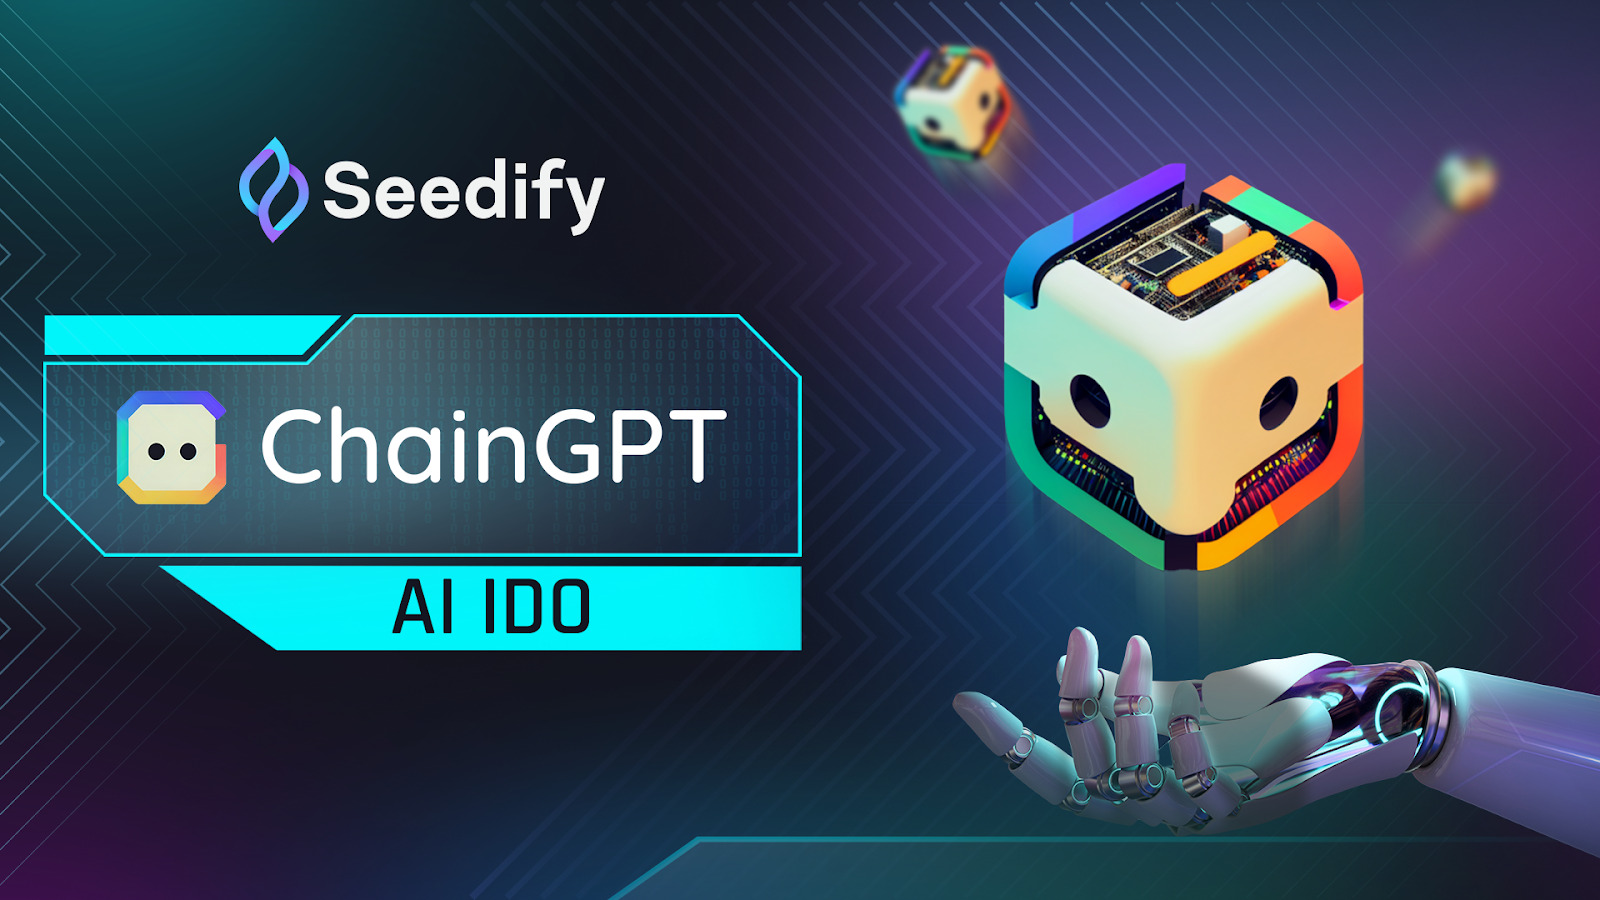 Seedify Launches ChainGPT – AI for the Blockchain Industry